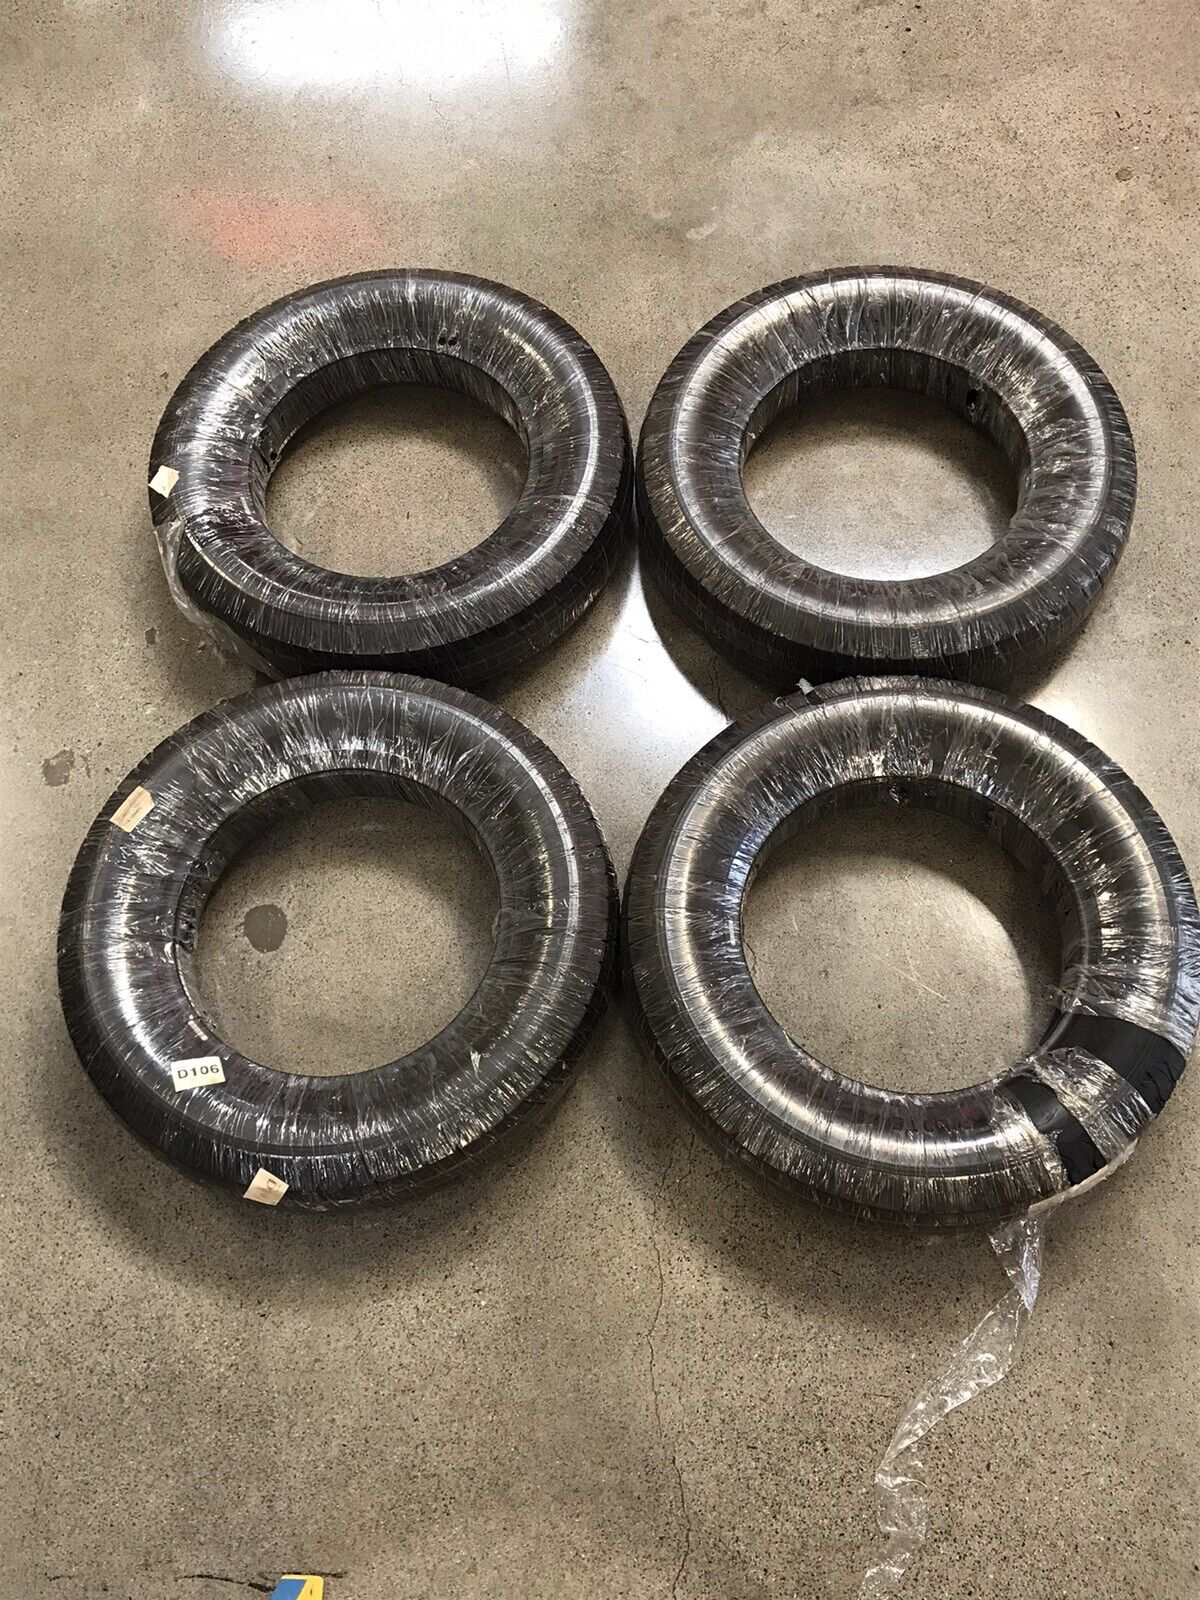 FOUR MICHELIN, PILOTE  X  TIRES 600 X 16 NEVER USED AS NEW IN ORIGINAL WRAPPERS